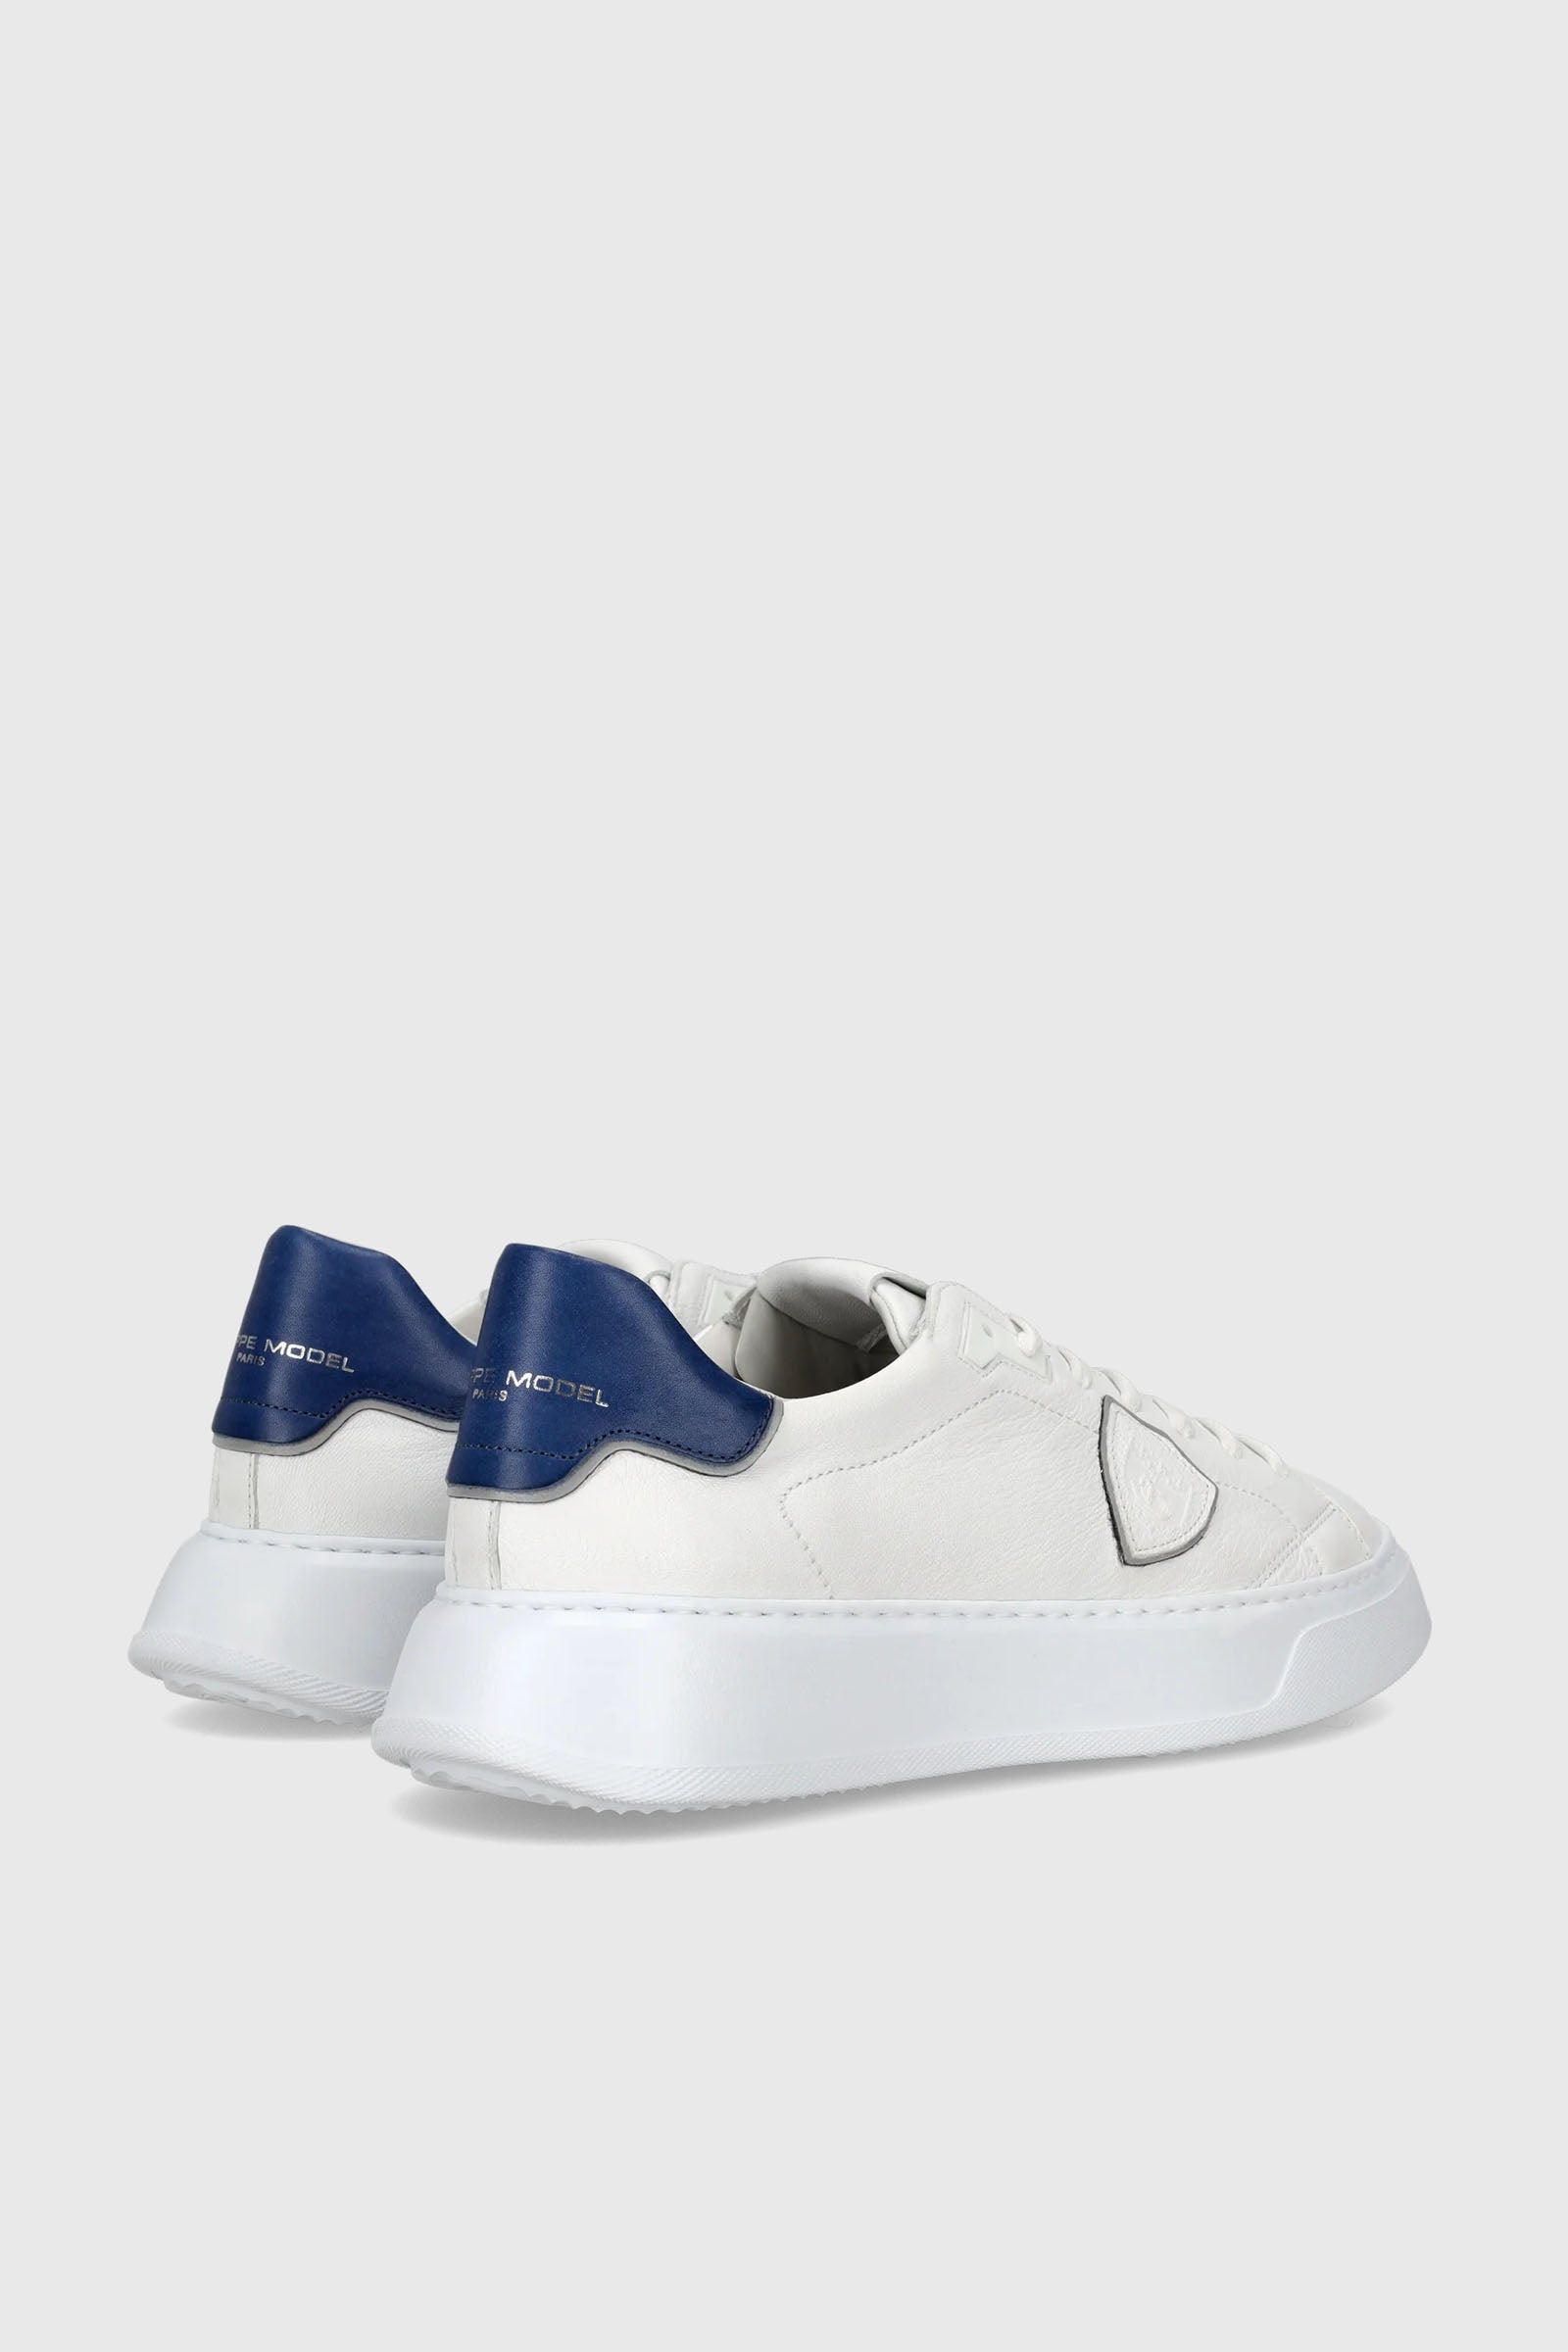 Philippe Model Sneaker Temple West Leather White/Blue - 3